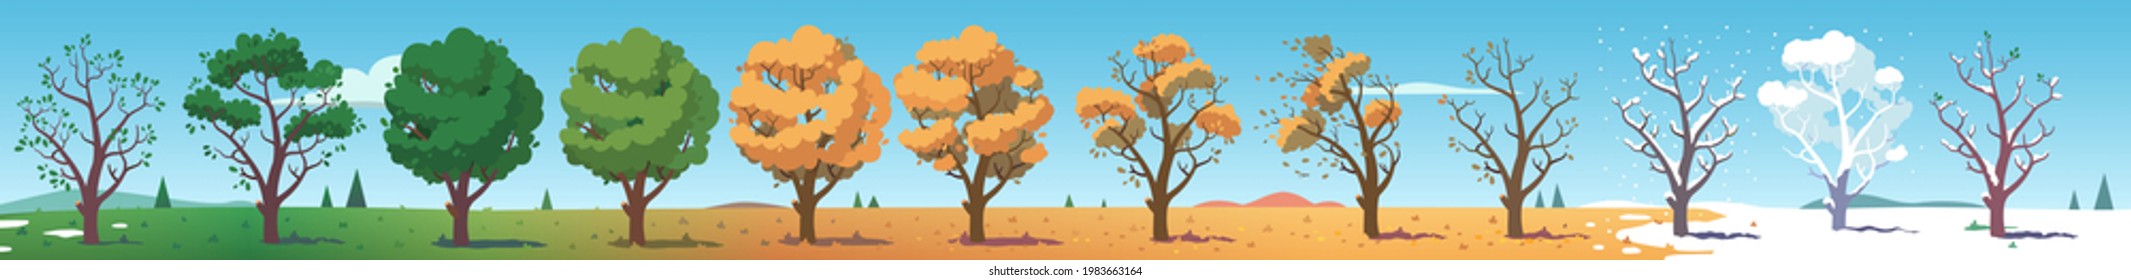 All four seasons tree plant cycle landscape set. Green, yellow foliage leaves crown, bare snow covered branches. Summer, autumn, winter and spring weather flat vector nature illustration design asset - Shutterstock ID 1983663164